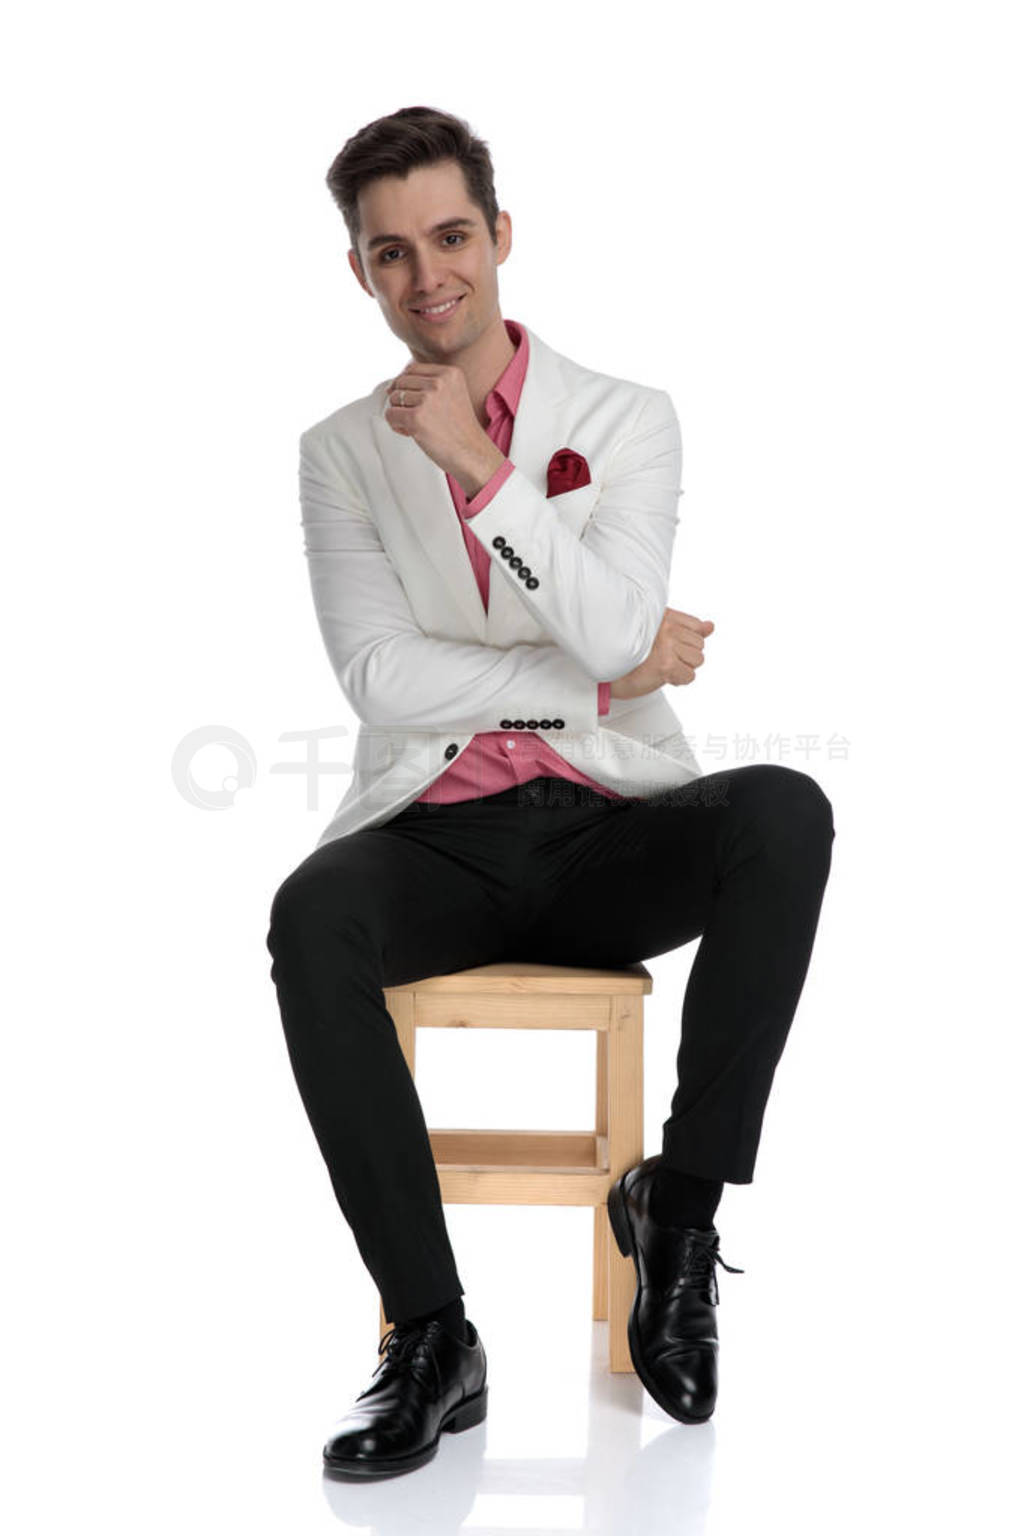 seated smiling young elegant man waiting for a job interview